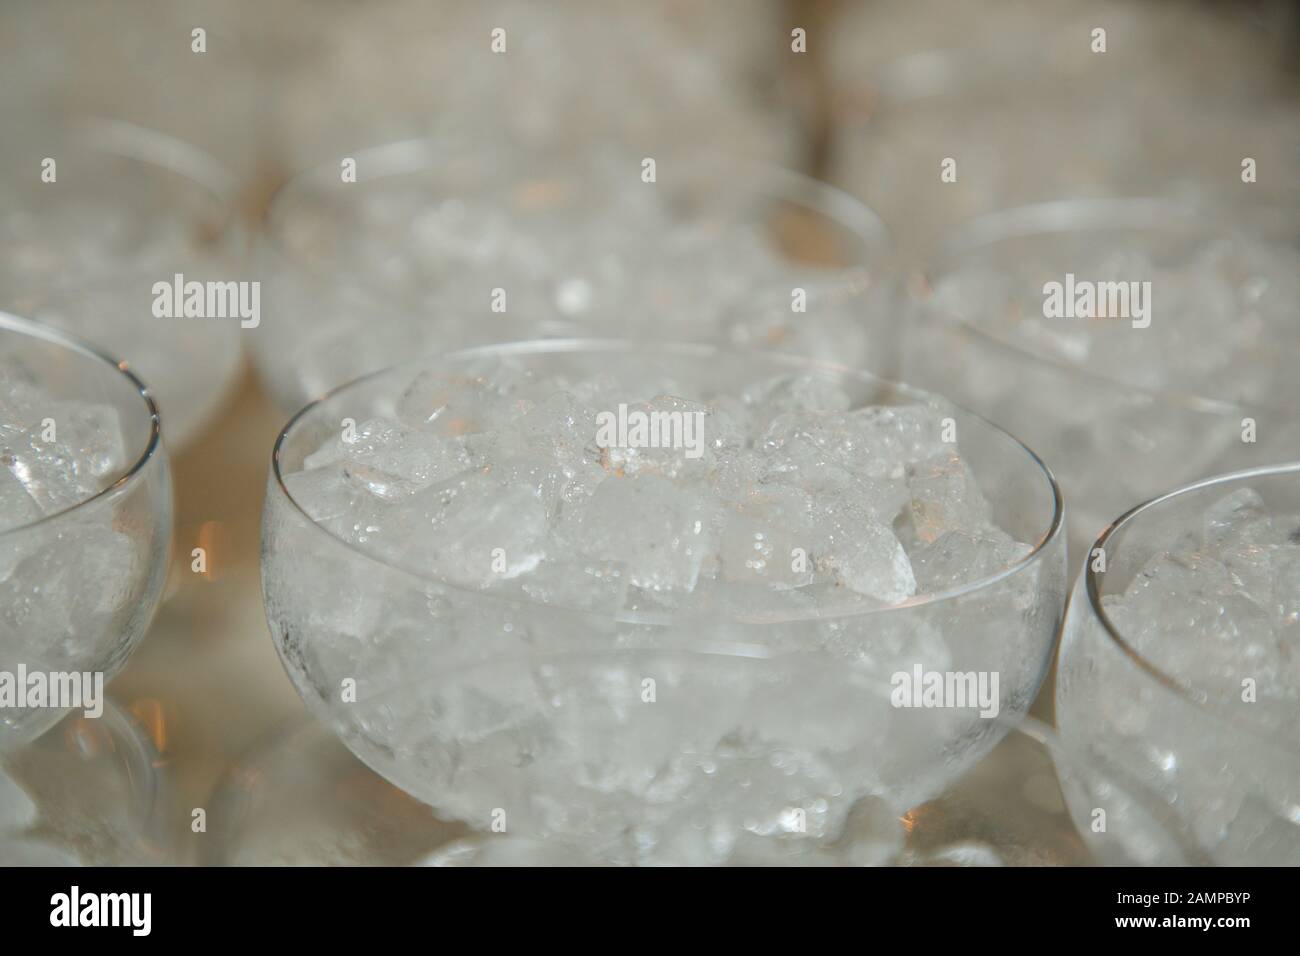 Drinking glasses with crushed ice waiting to be filled. Stock Photo